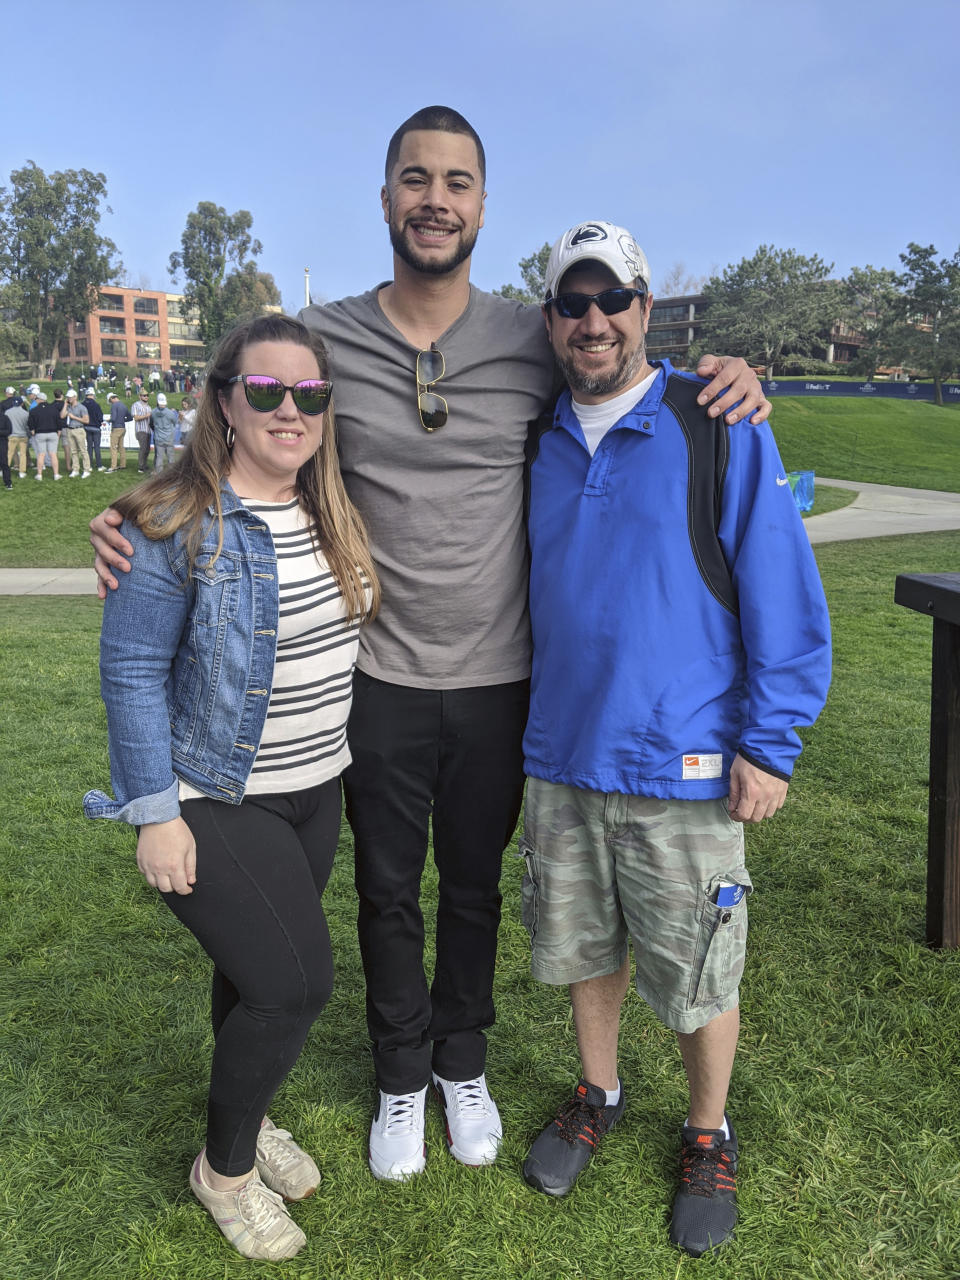 In this photo provided by Lora Greco, Lora and Matt Greco flank then-San Diego Padres baseball player Joey Lucchesi at the 2020 Farmers Insurance Open golf tournament in San Diego. Lora and Matt Greco hosted players in Lake Elsinore — a Class A affiliate for the San Diego Padres — for three seasons from 2017-19. Their tenants included future big-league pitchers Joey Lucchesi and David Bednar. The Grecos said Lucchesi used to stop at a gas station on his way home from games, pick up a movie from a Redbox in the parking lot, and then come home for a family movie night. (Photo Courtesy Lora Greco via AP)